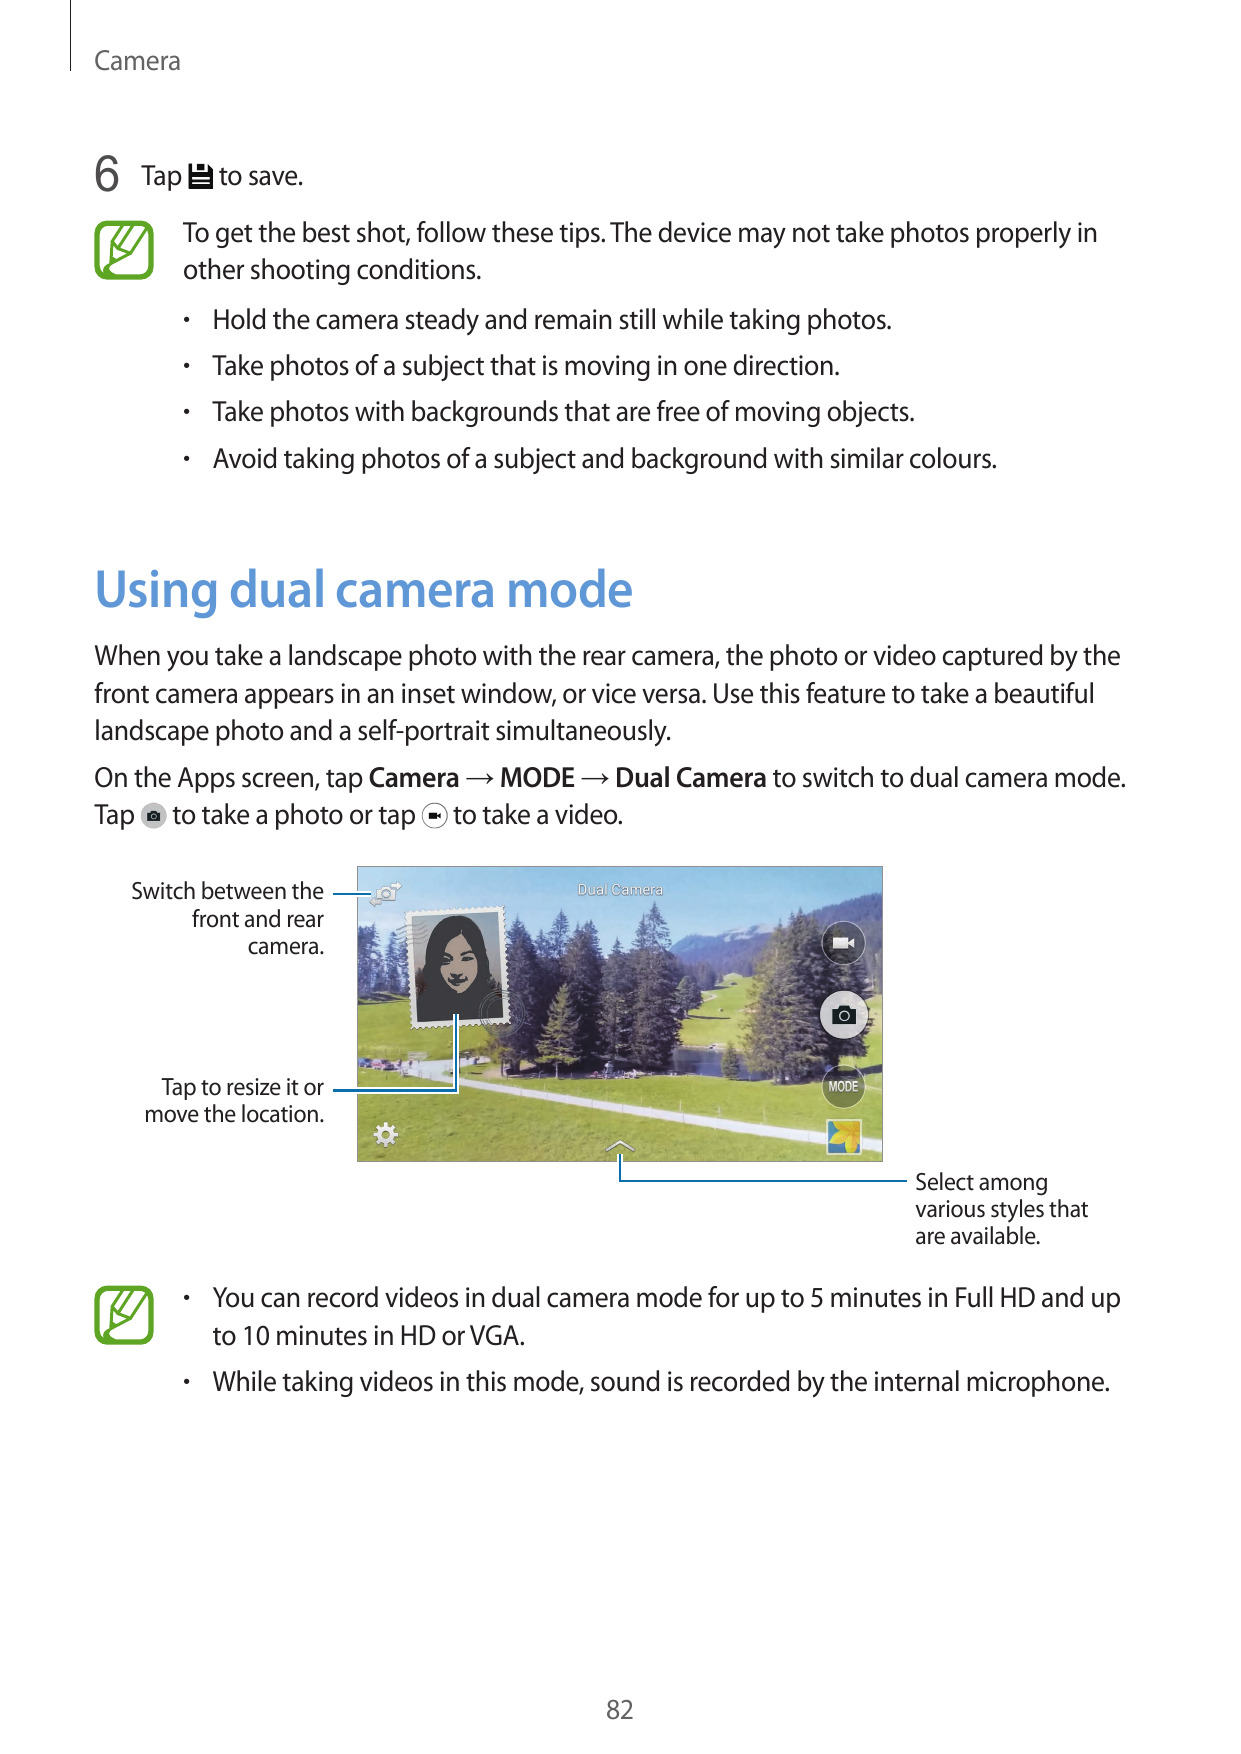 Camera6 Tapto save.To get the best shot, follow these tips. The device may not take photos properly inother shooting conditions.